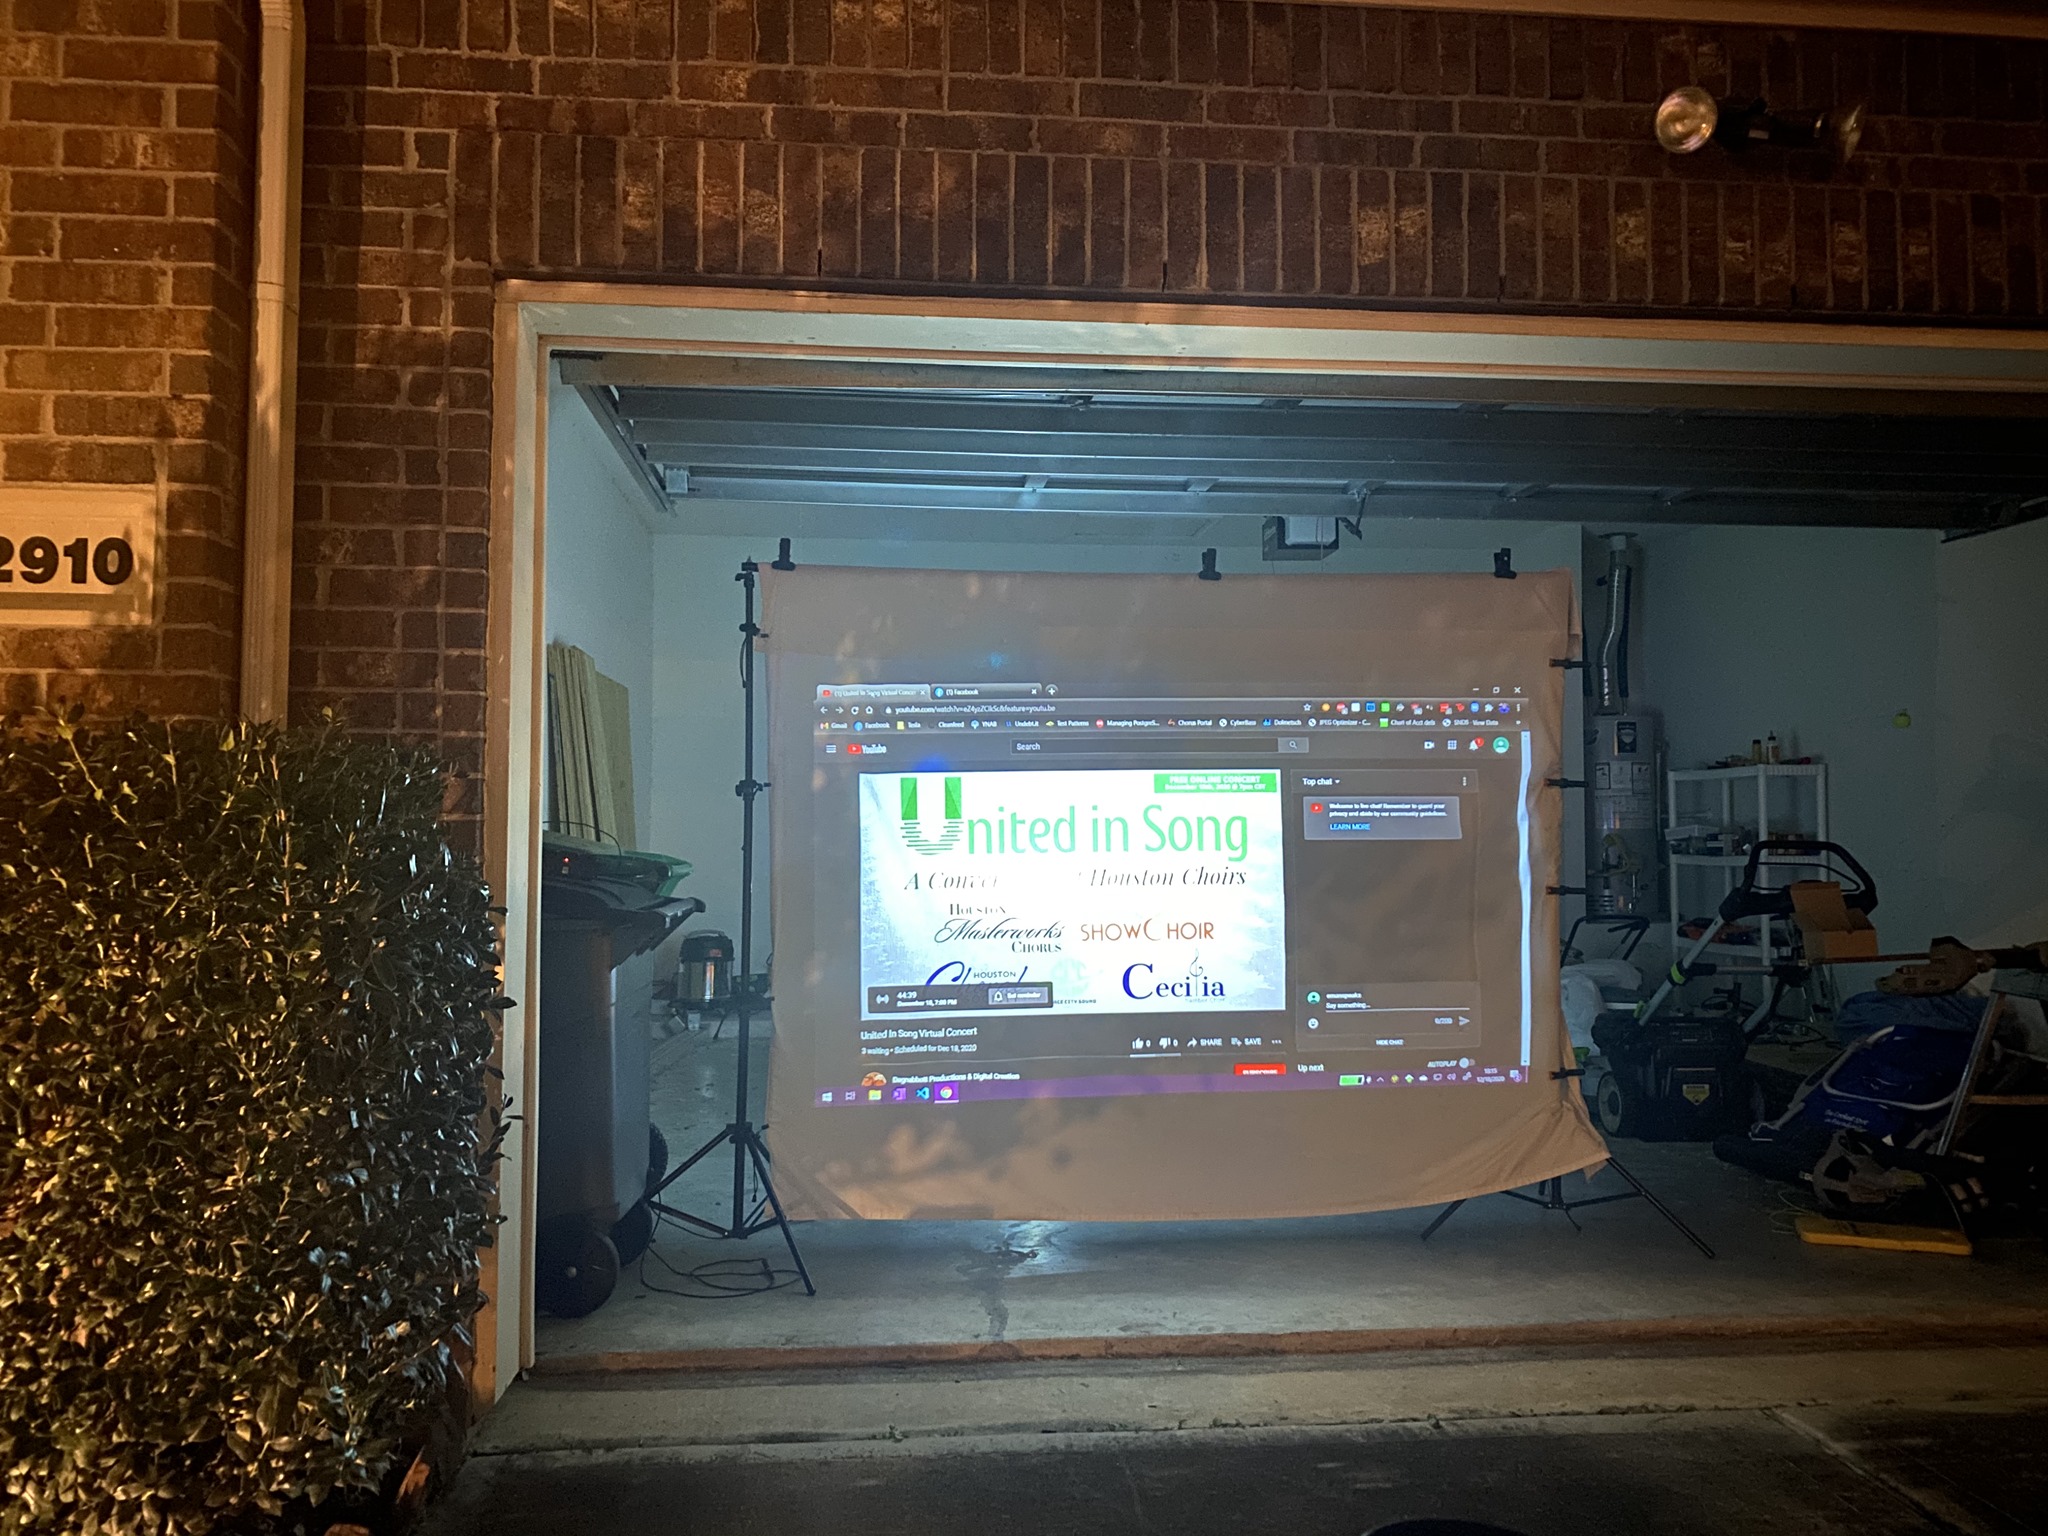 Projecting the livestream video in my driveway